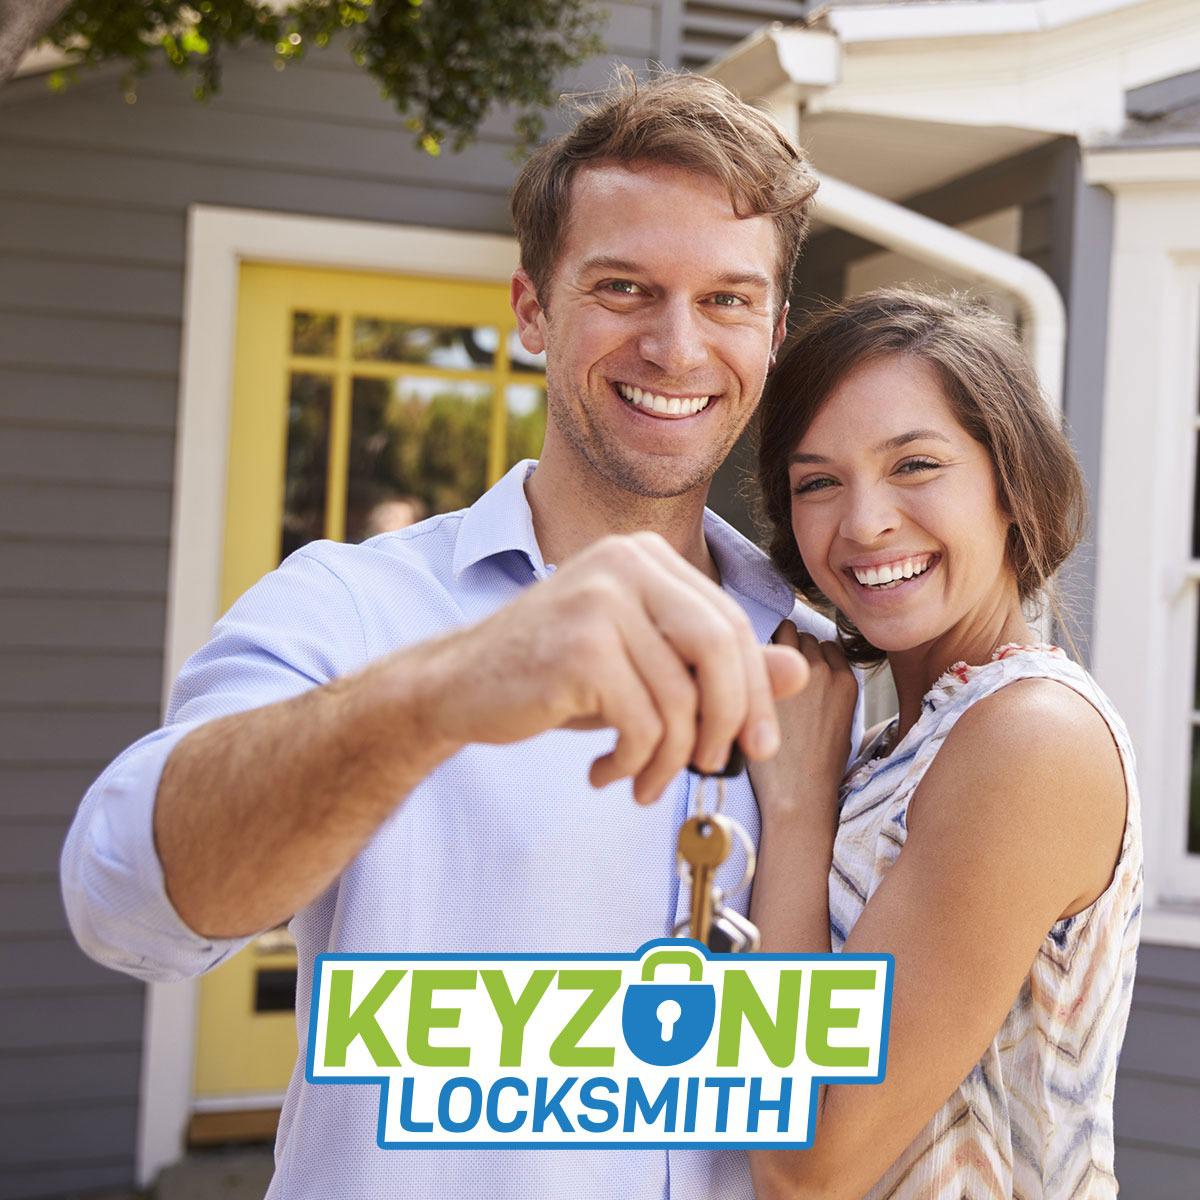 Automotive Locksmith

We are the most reliable automotive locksmith services provider in Canoga Park. If you ever find yourself locked out of your car or can’t seem to find your car keys, then call us today